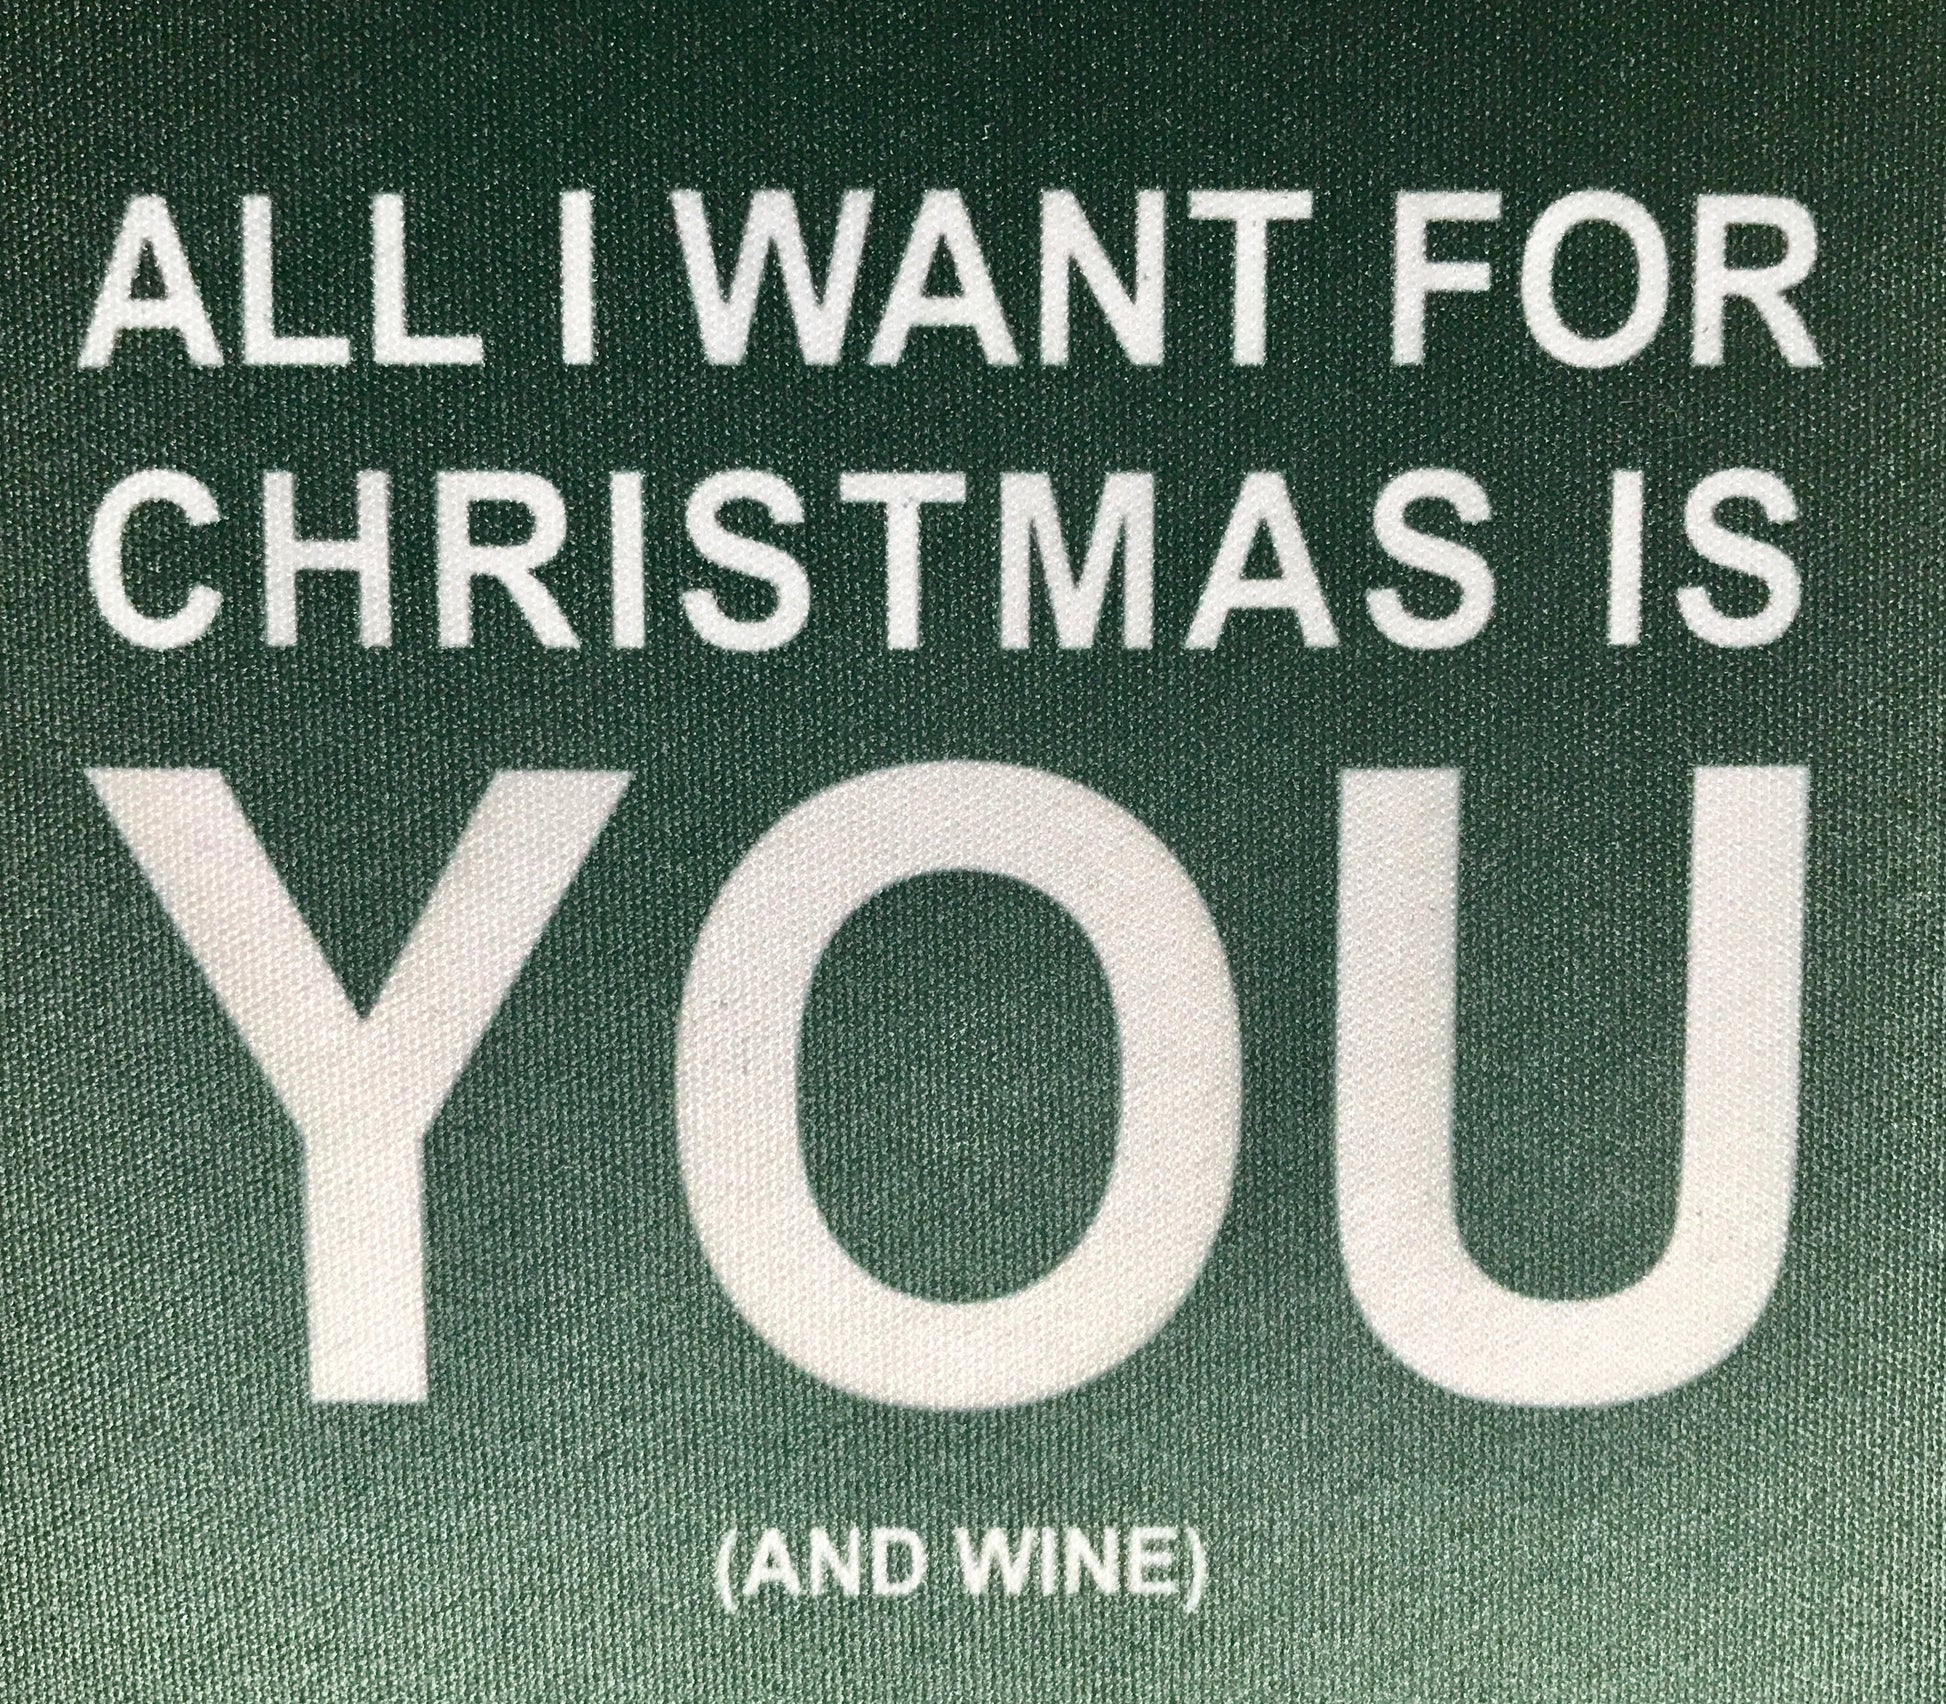 All I Want for Christmas Insulated Wine Tote Bag - Lindsay Ann Artistry